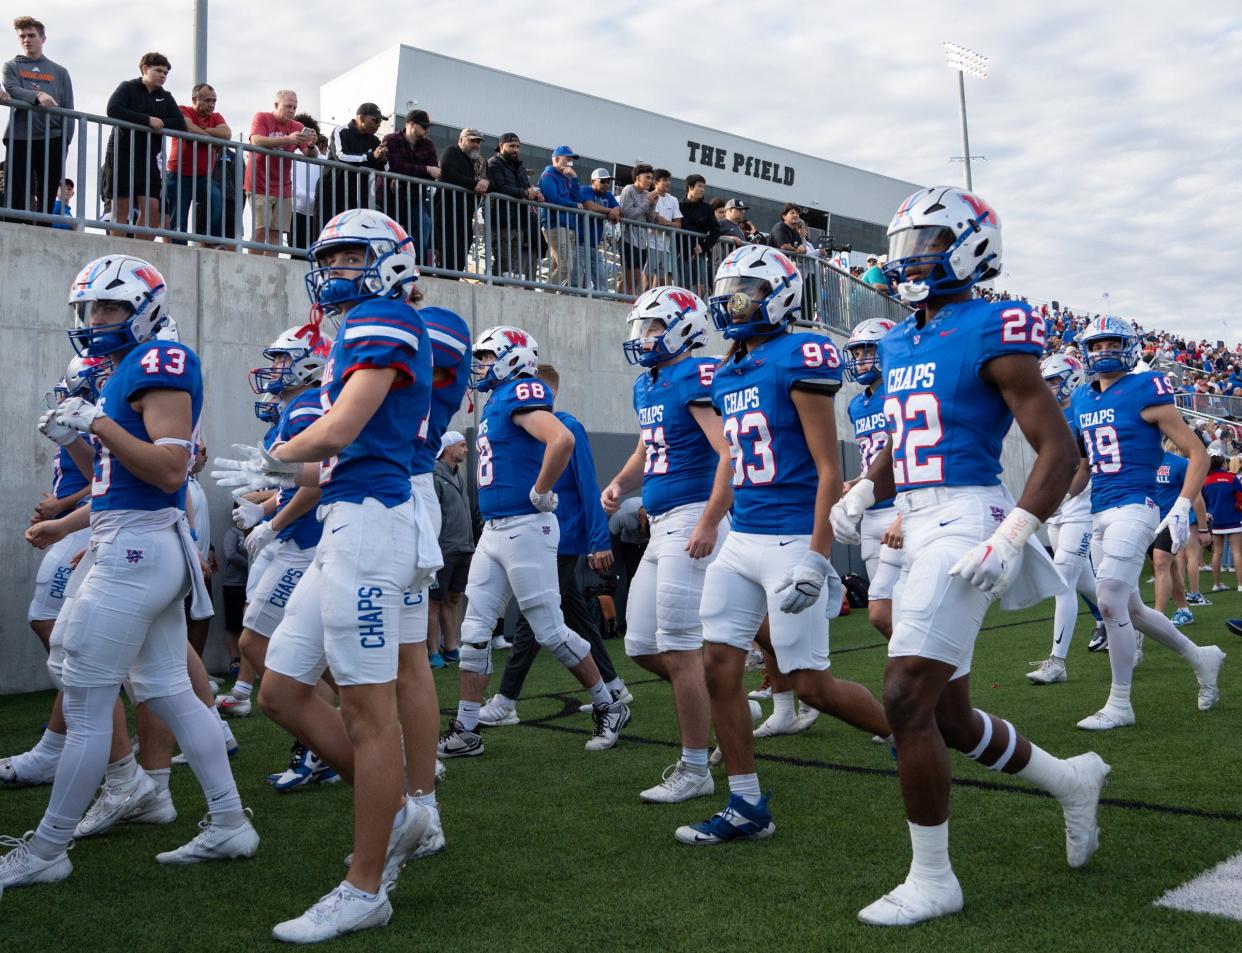 Westlake heads for the locker room at half time in the 6A UIL high school football semifinal game at the Pfield in Pflugerville, Saturday, December 9, 2023. North Shore defeated Westlake 23-14, knocking them out of the playoffs.